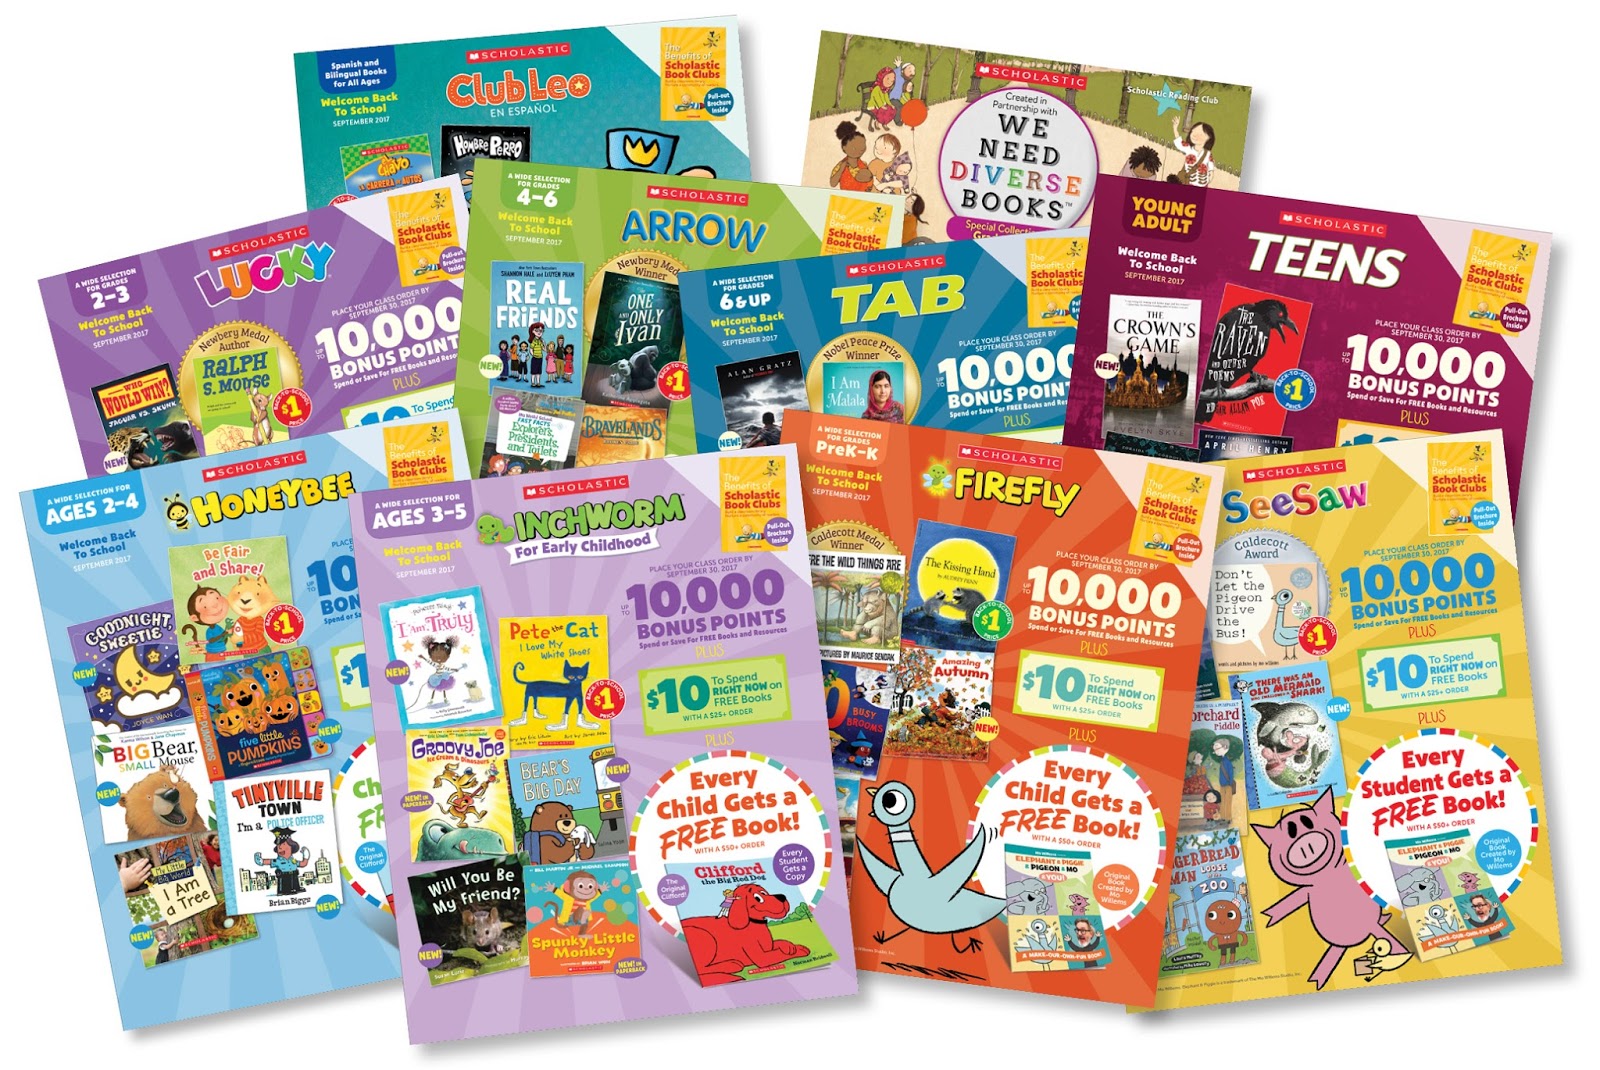 Scholastic Book Club brochures have been given